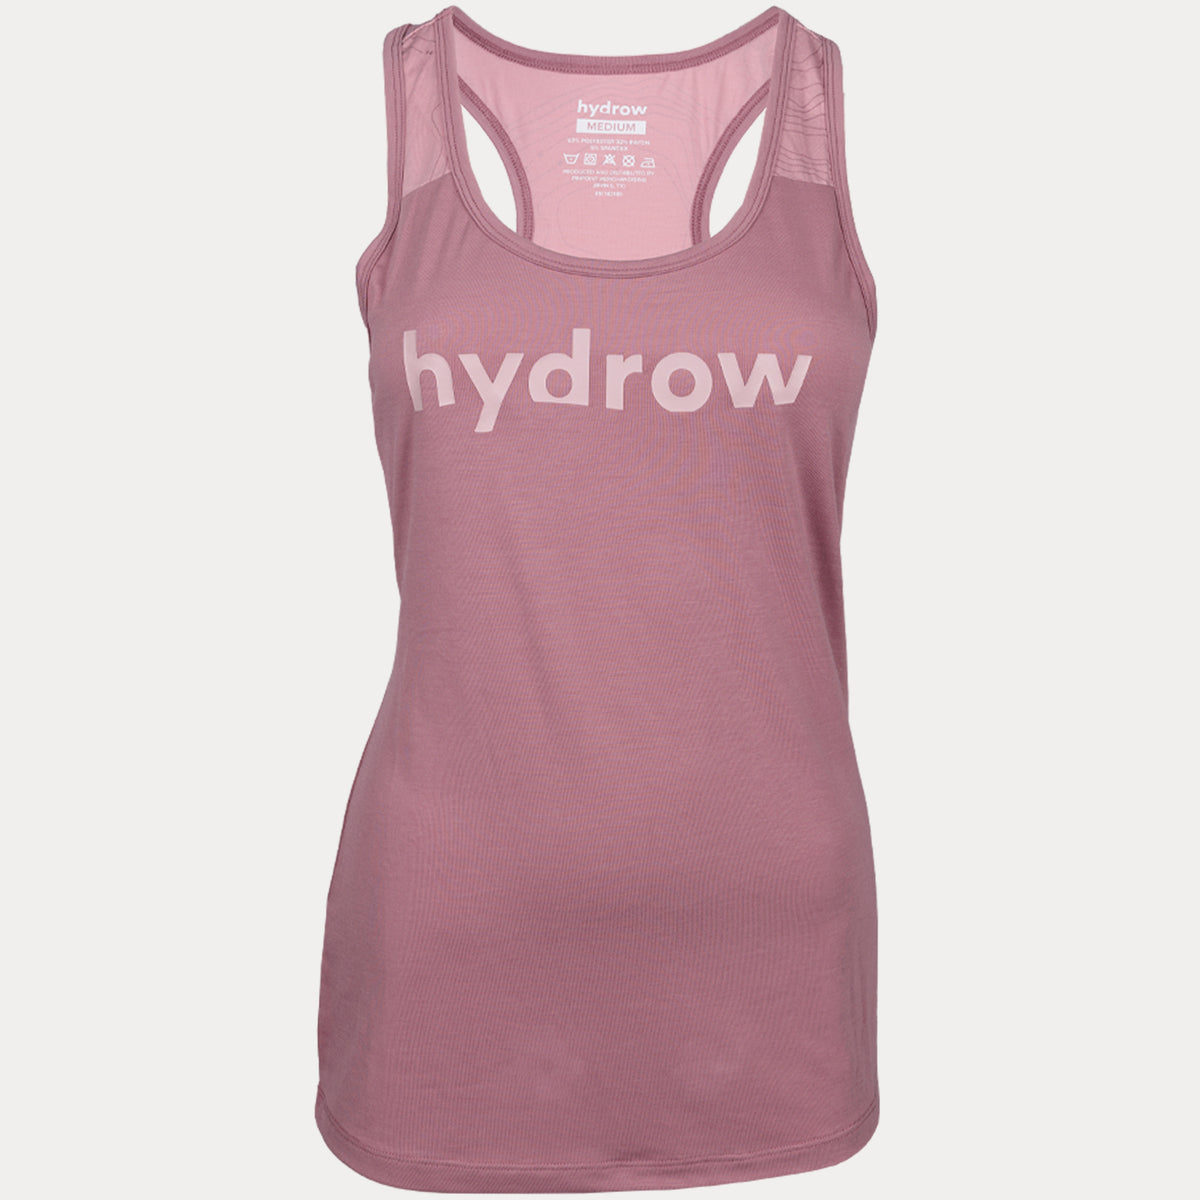 front view of performance tank in dusty mauve hydrow logo on chest